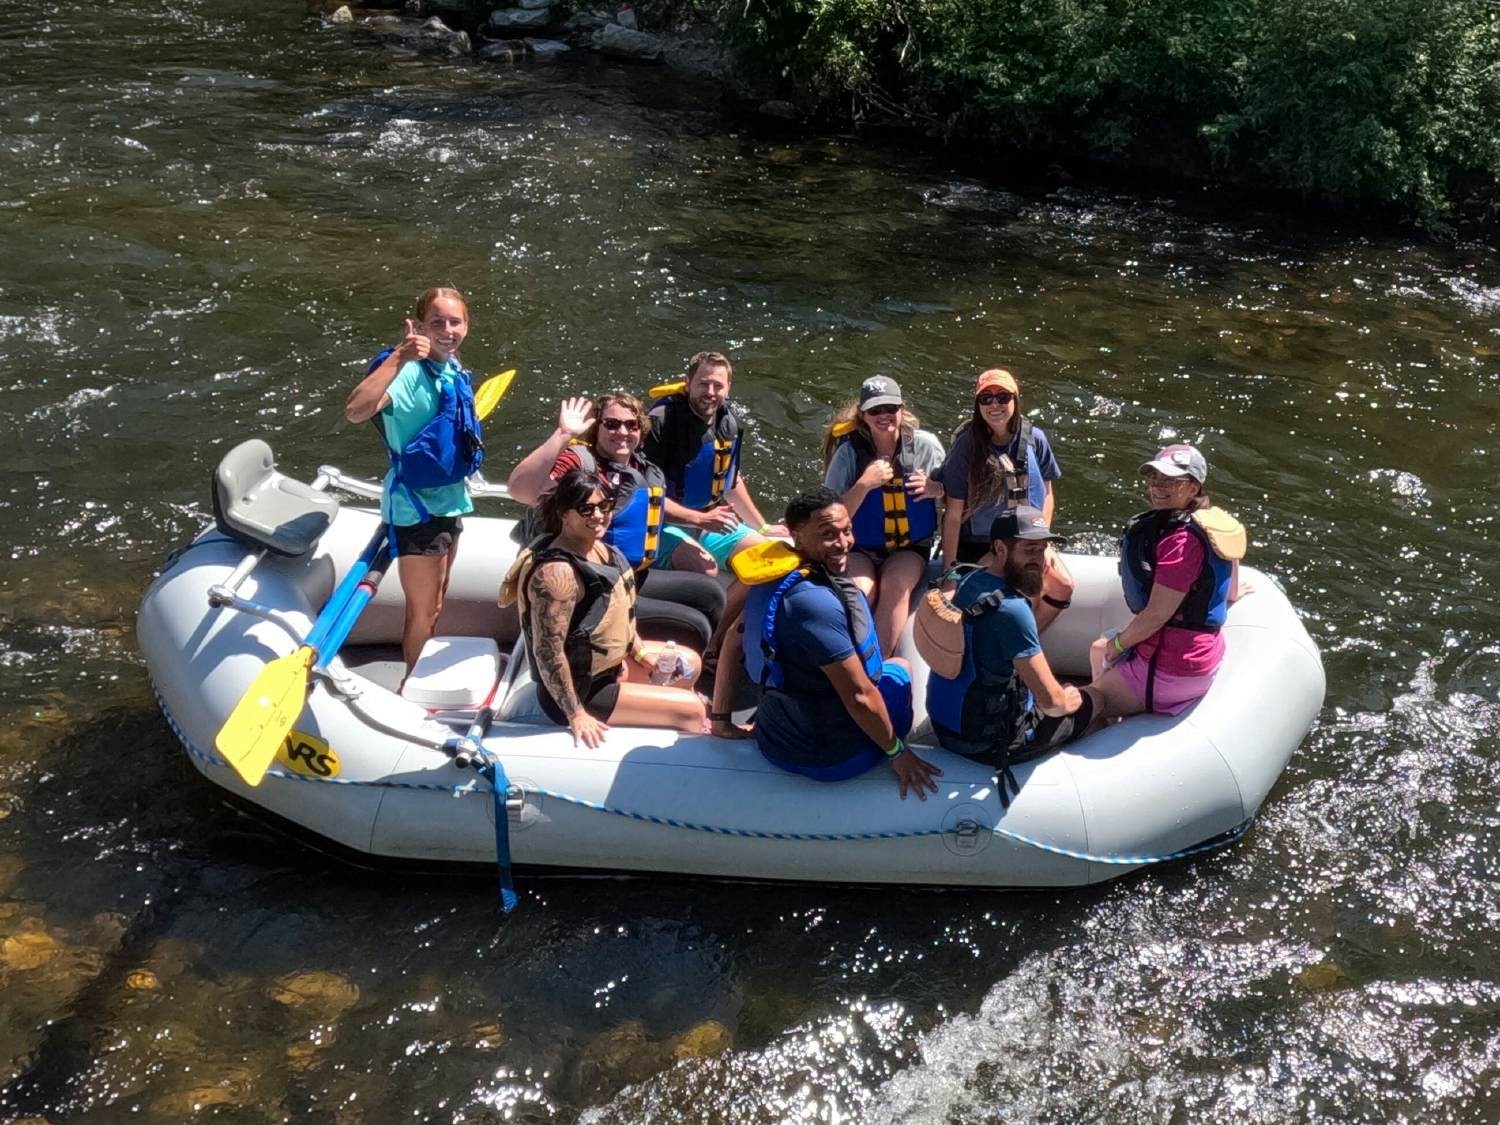 Our Marketing team having an amazing time whitewater rafting during their team day at the 2023 August Company Onsite.